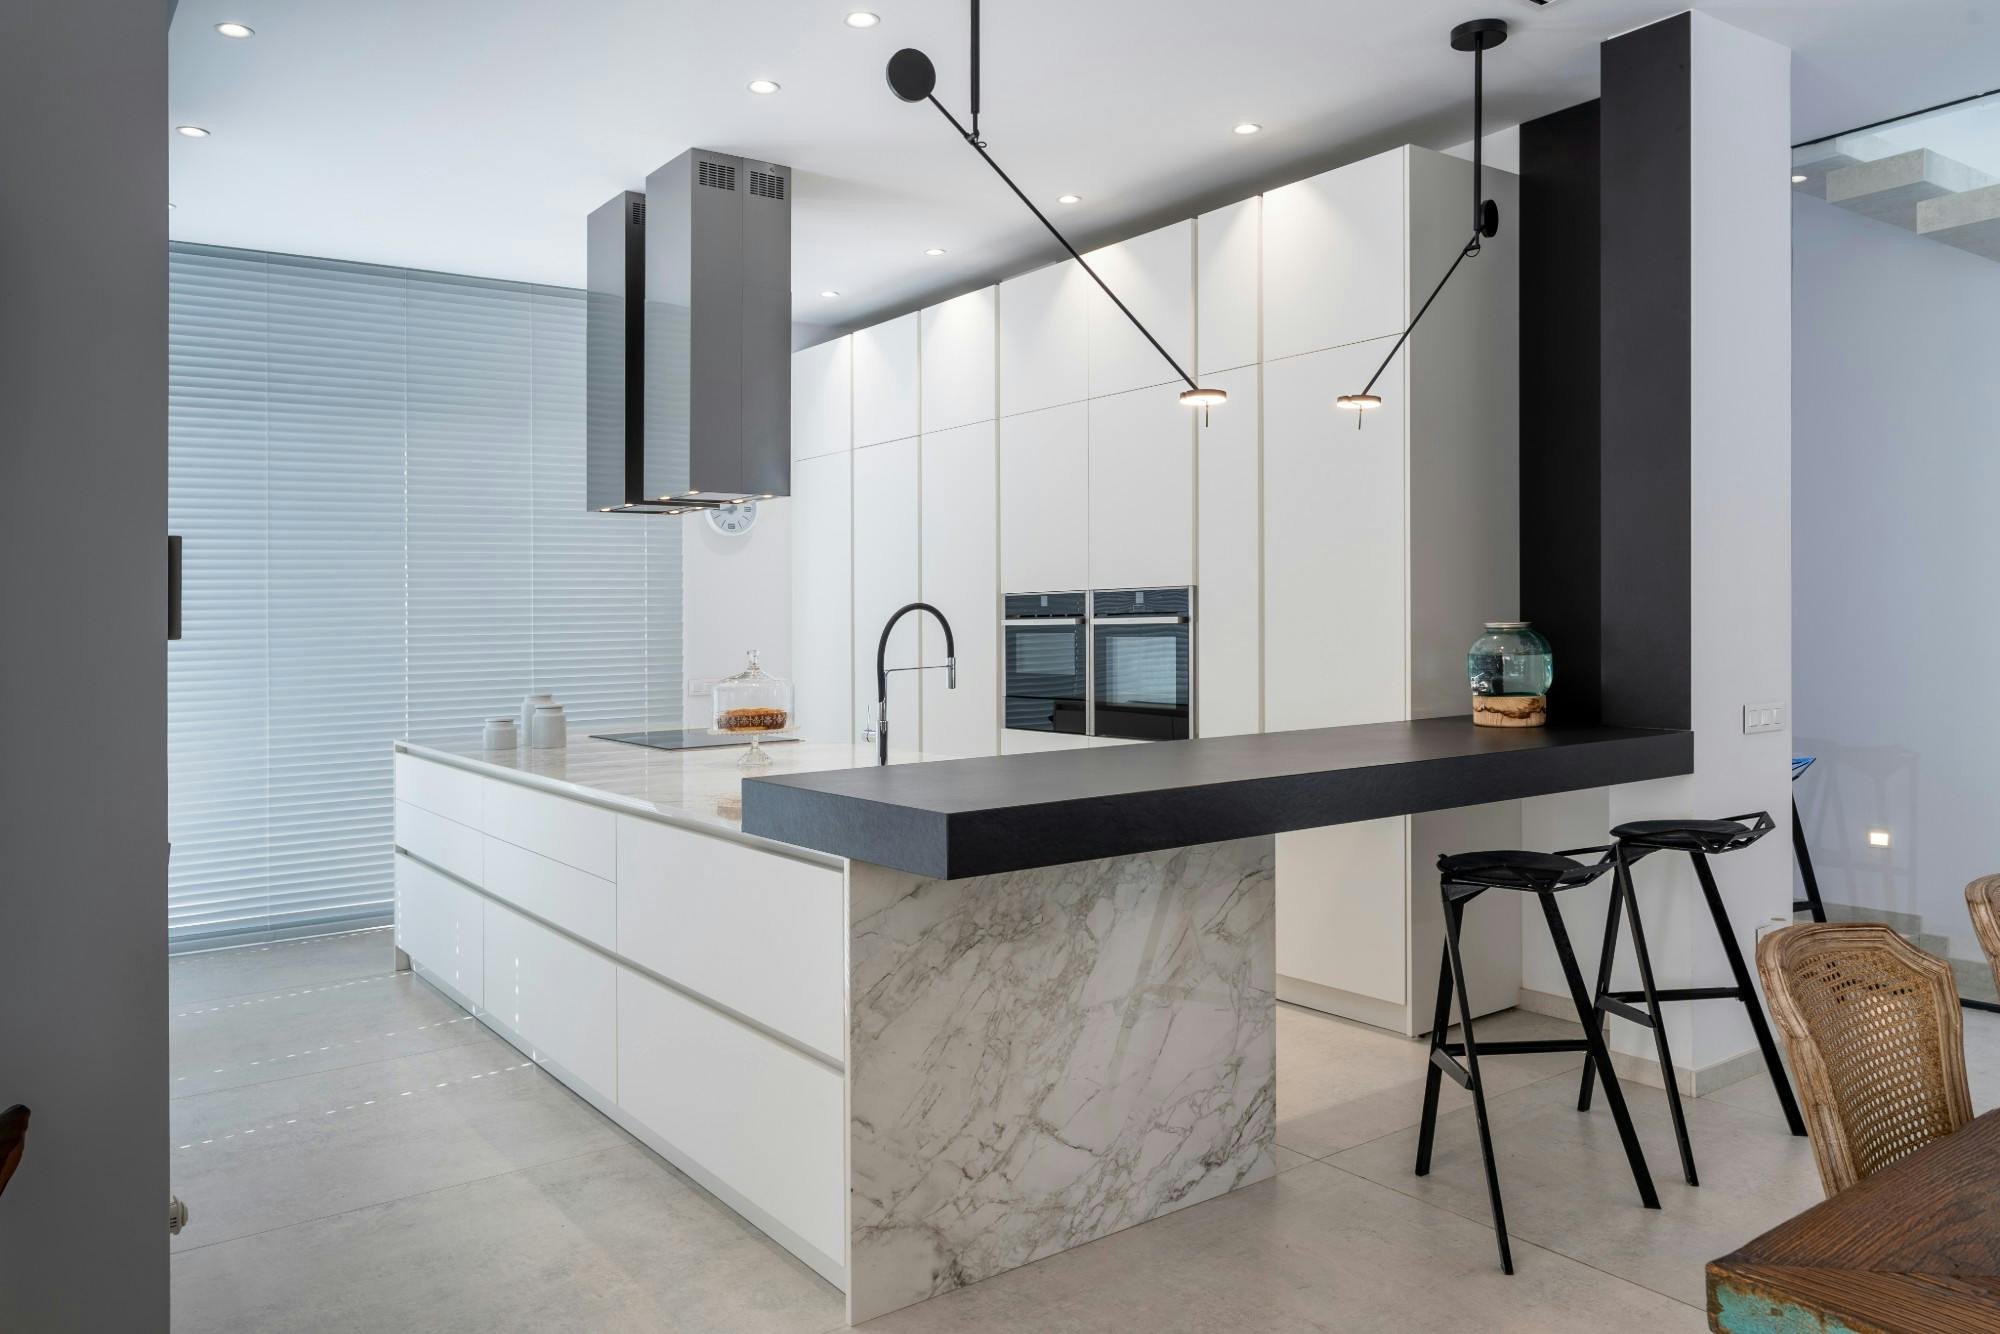 Numéro d'image 47 de la section actuelle de DKTN Sirius adds a welcoming touch to the kitchens of a residential development in Dubai de Cosentino France